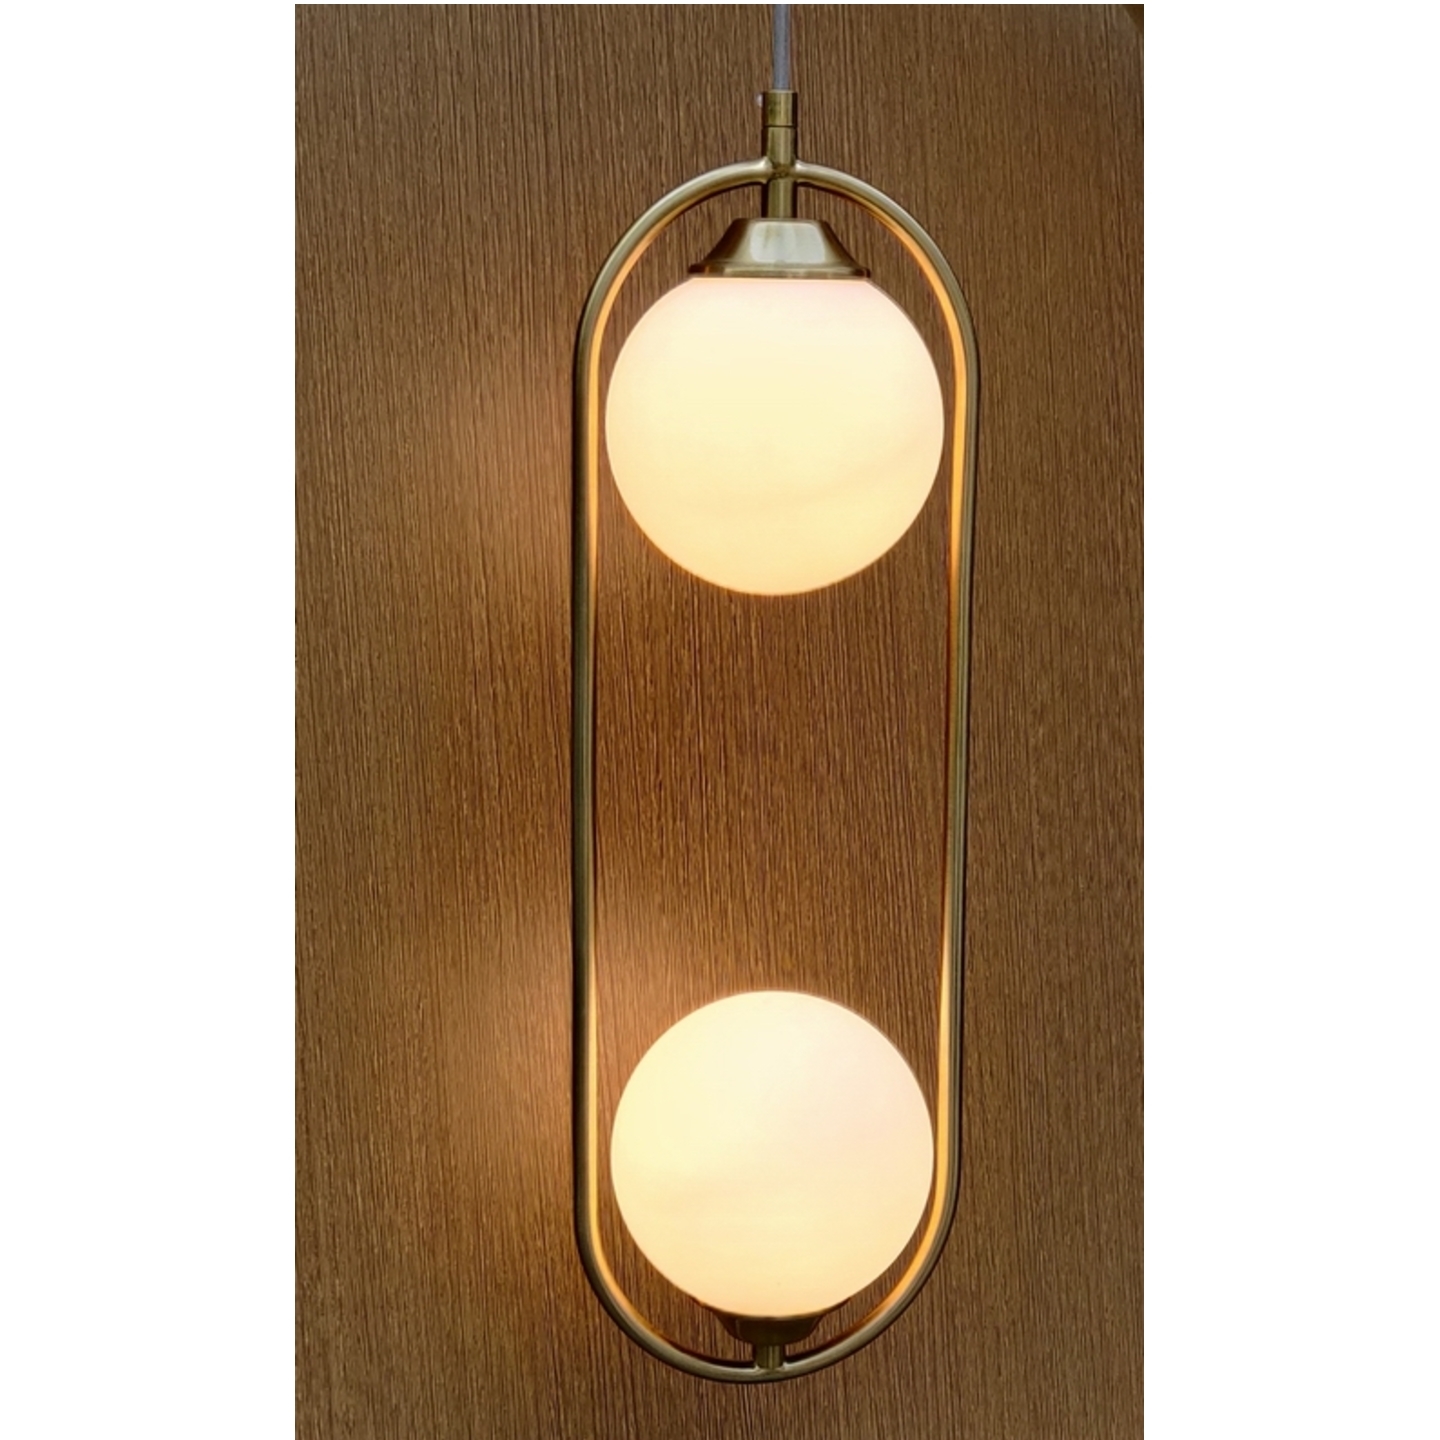  Double Glass Hanging Light